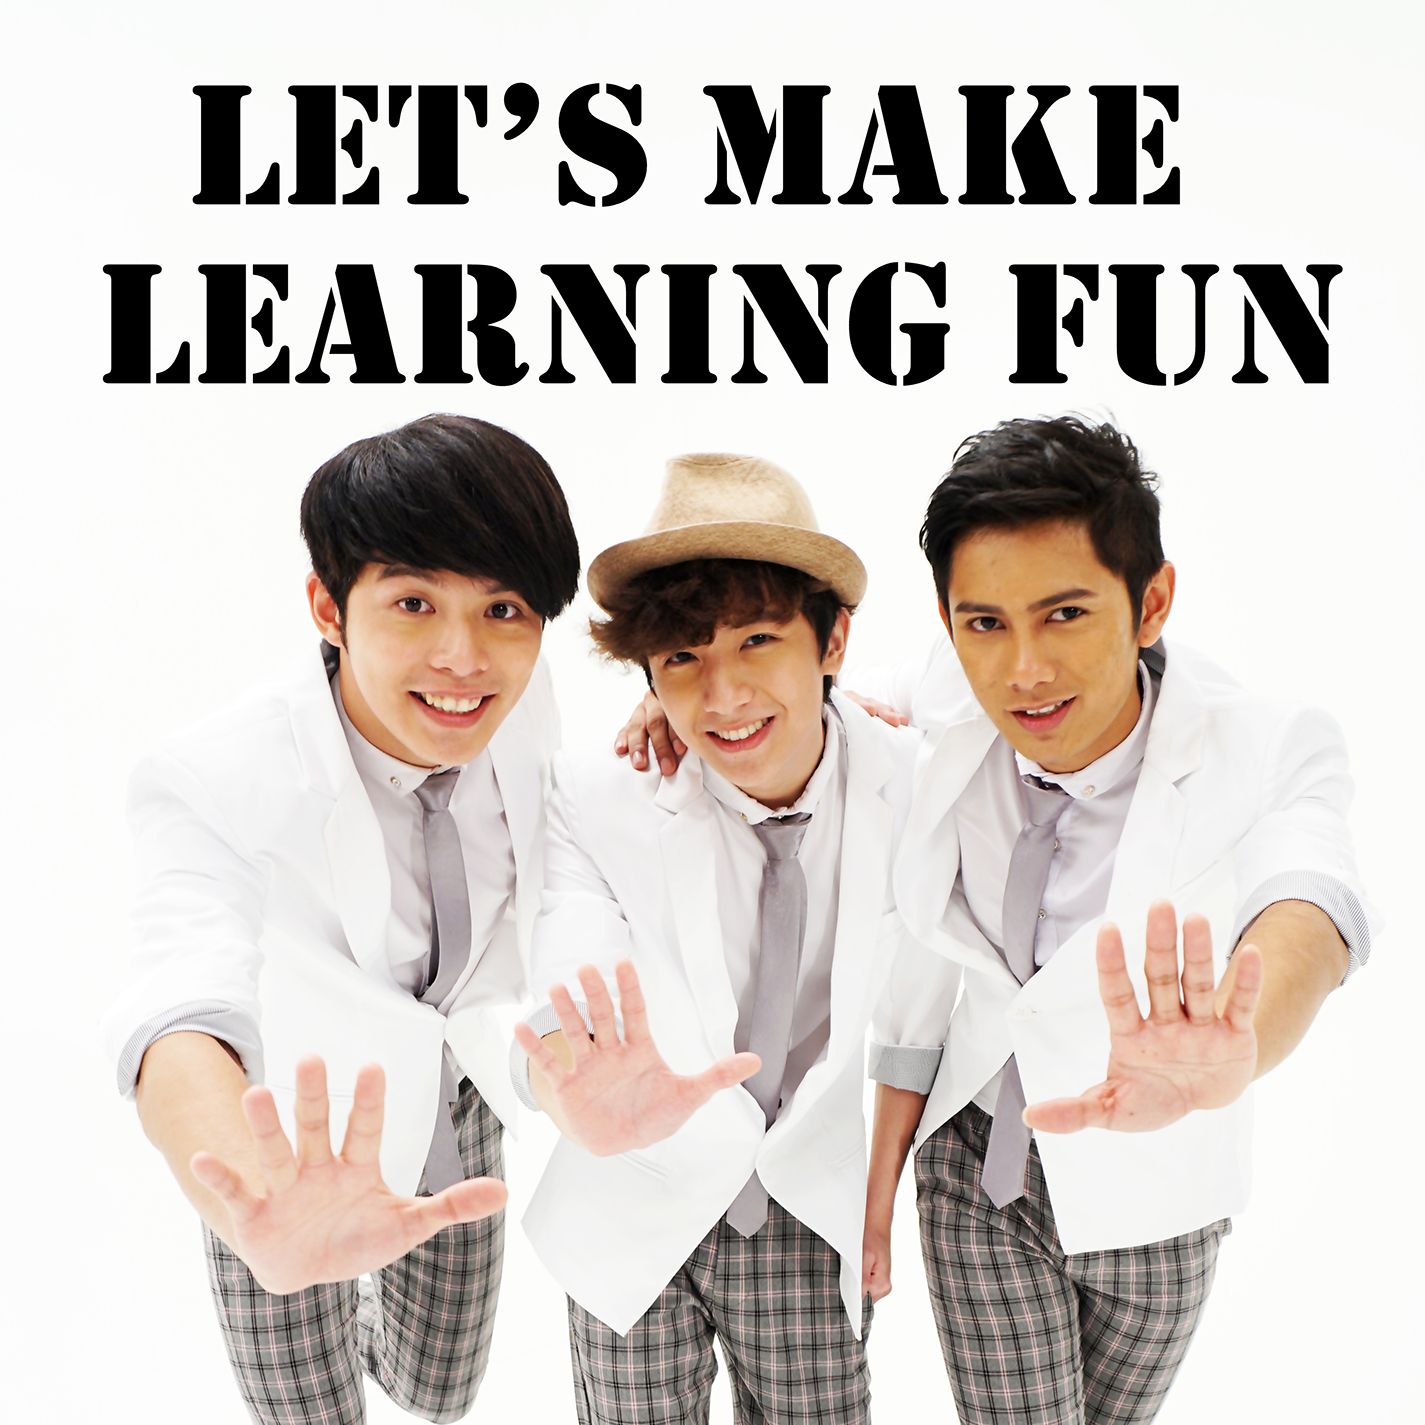 Lets Make Learning Fun